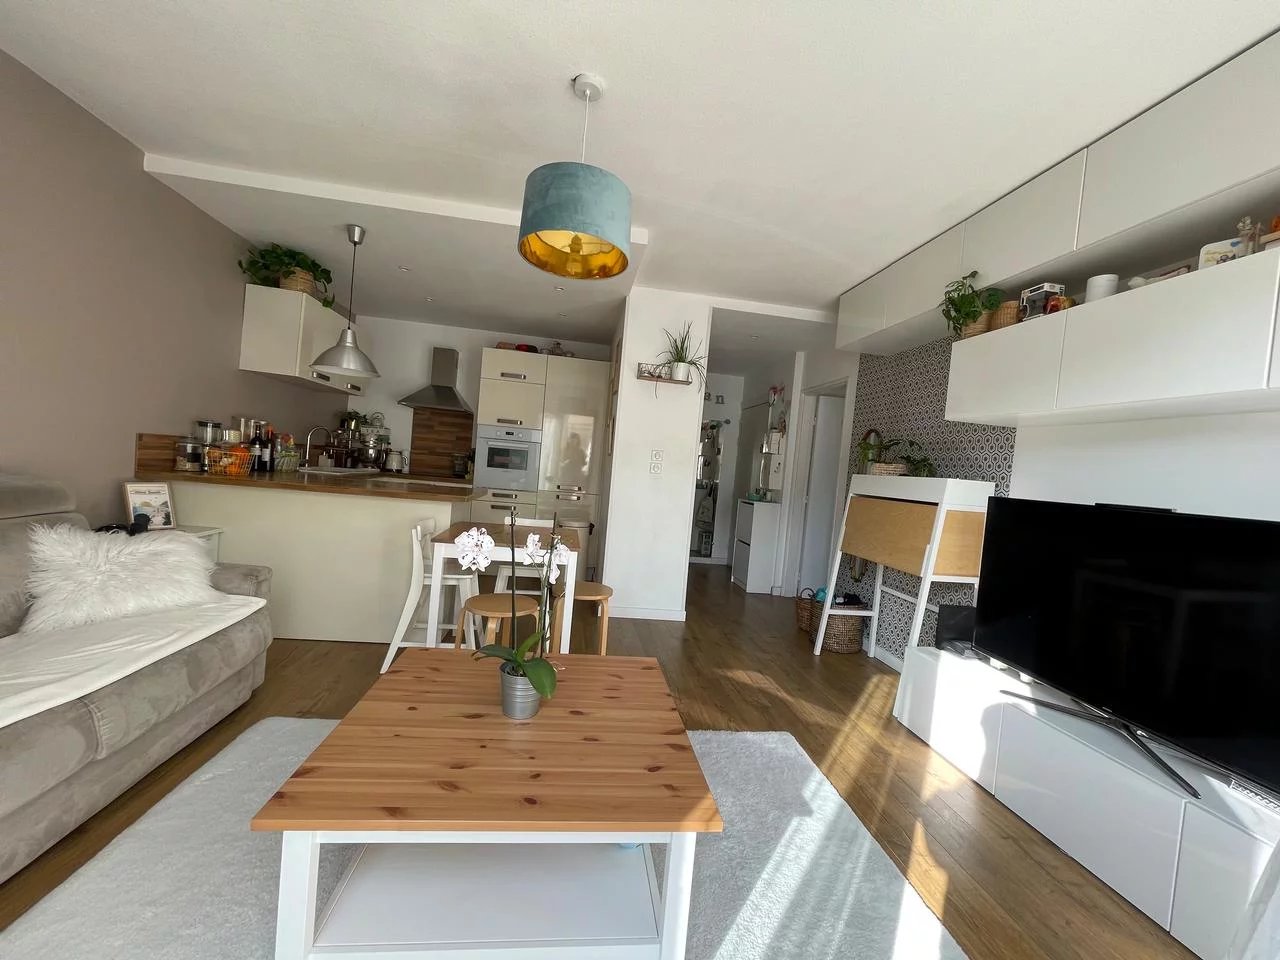 Appartement  2 Rooms 48.09m2  for sale   259 000 €